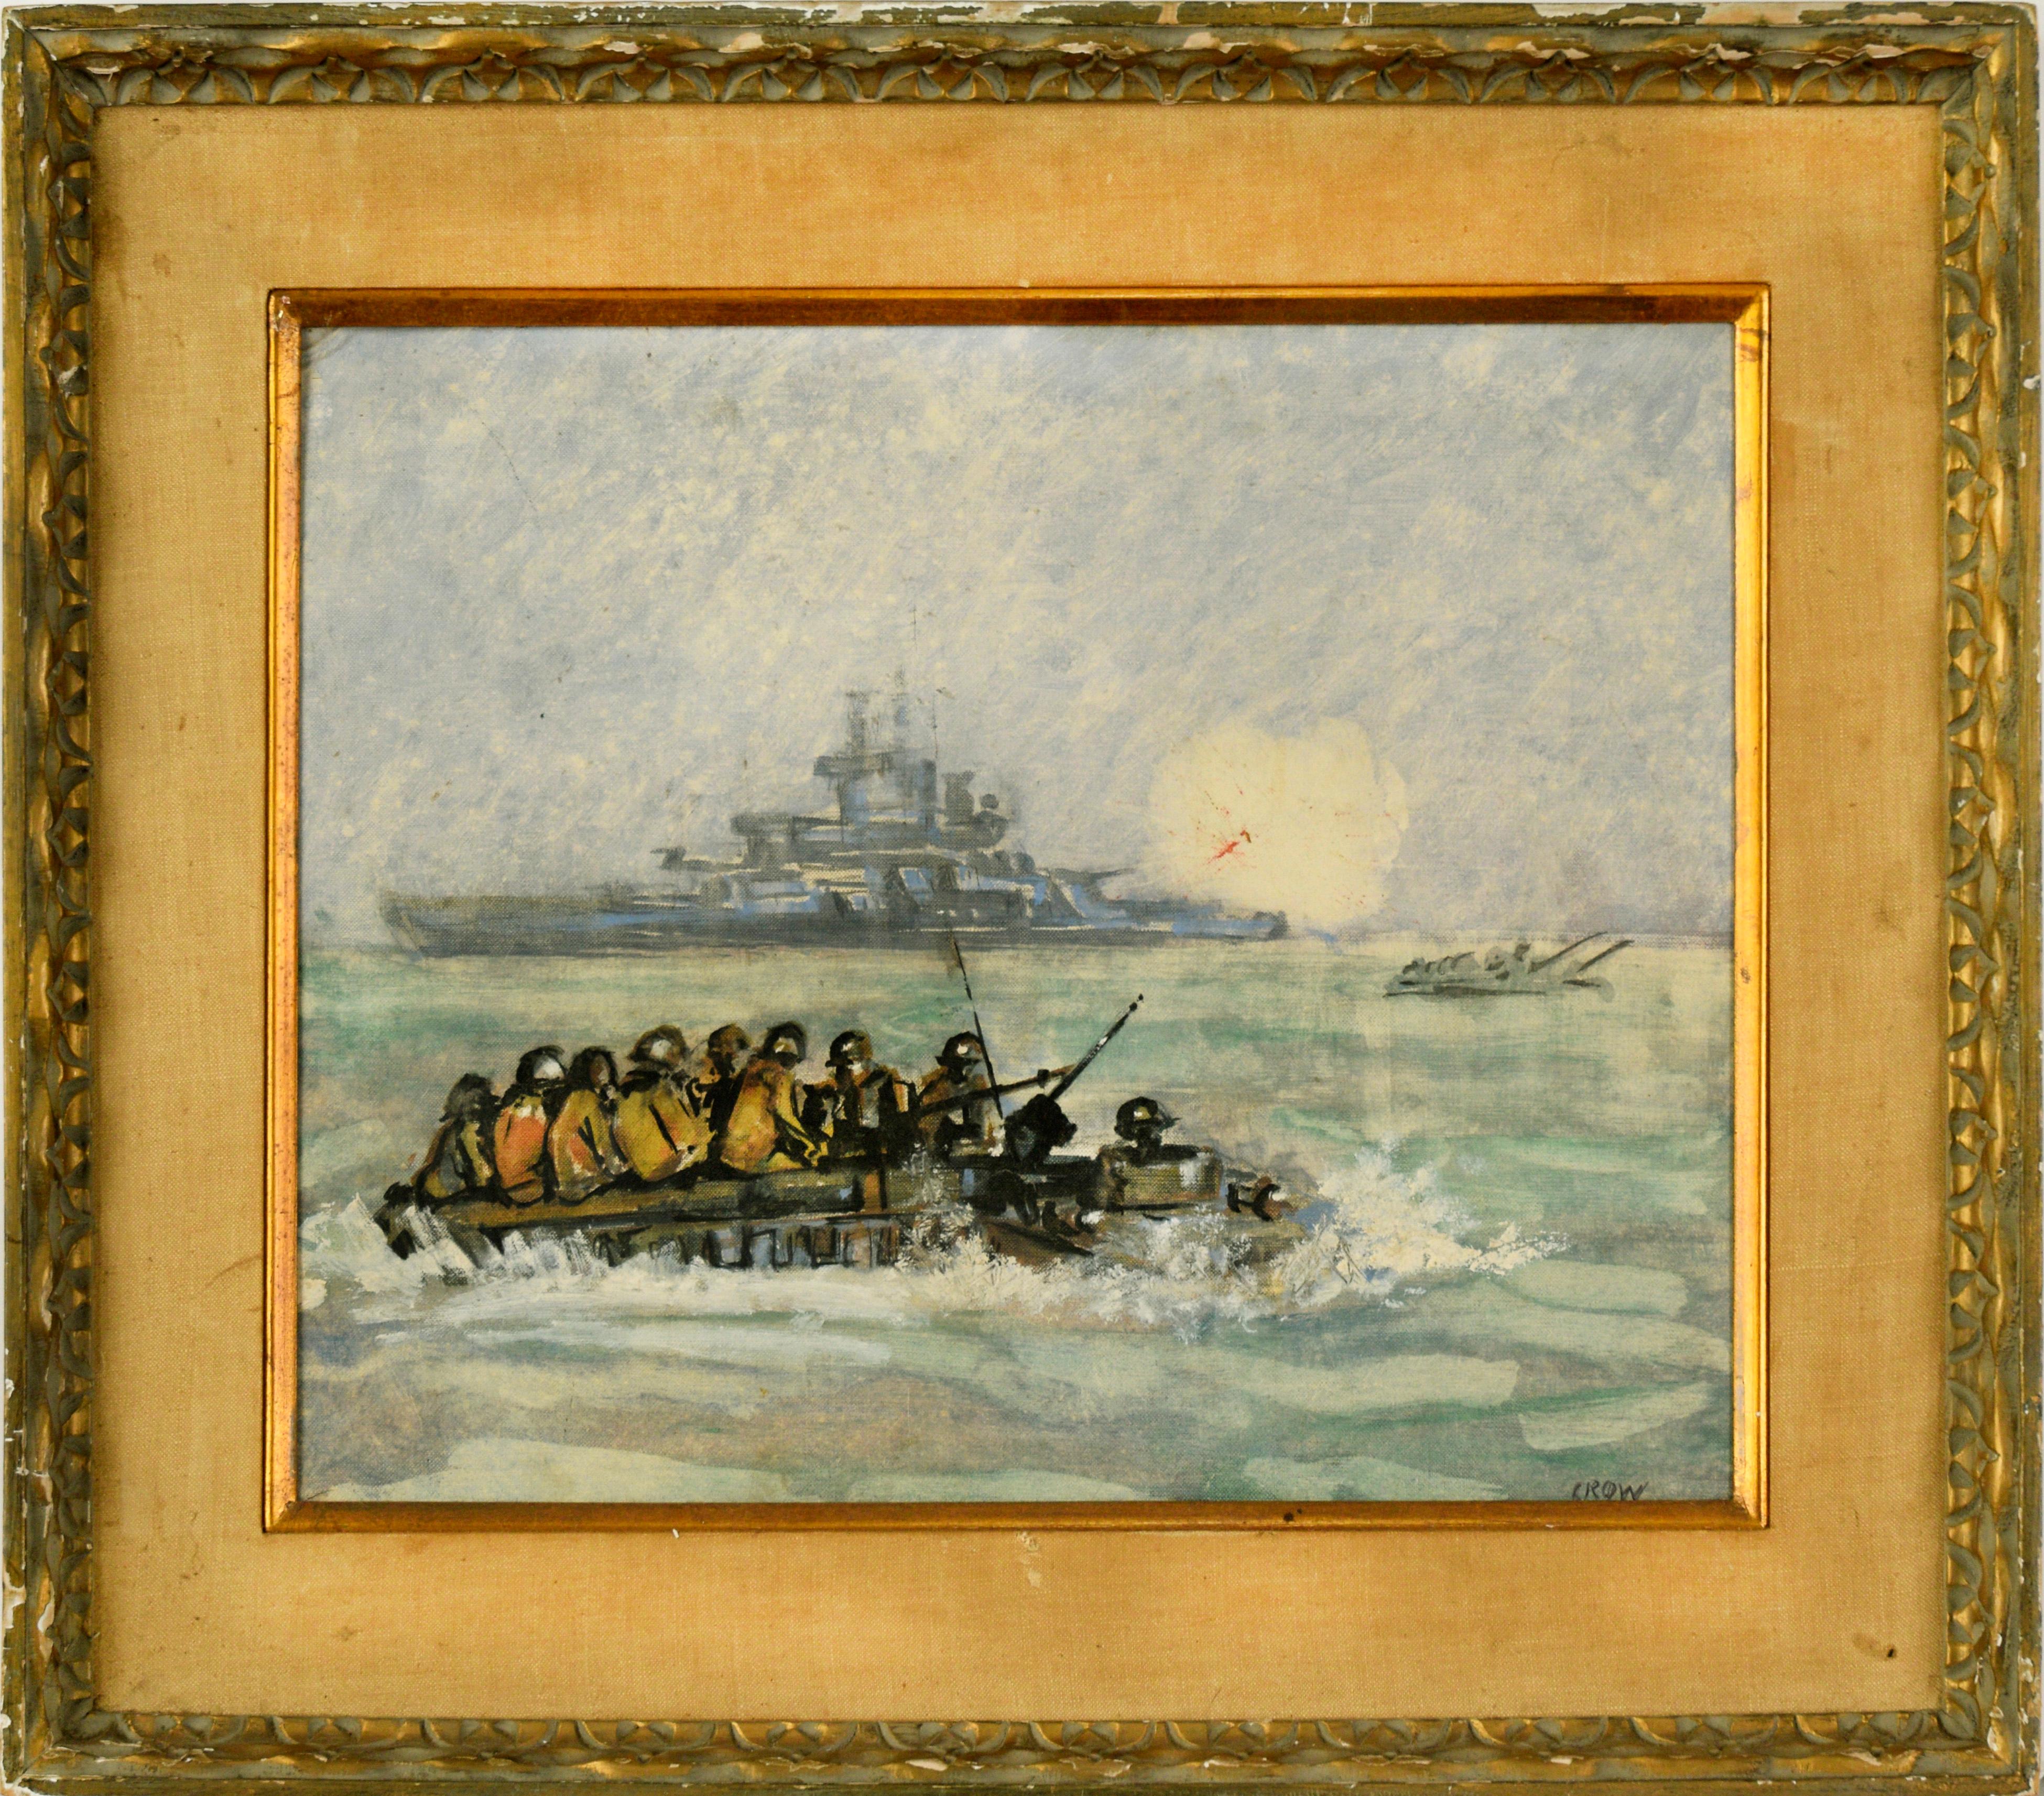 Linna Annetta Fogle Crow Figurative Painting - American Soldiers Landing Boats with Warships Firing in the Distance